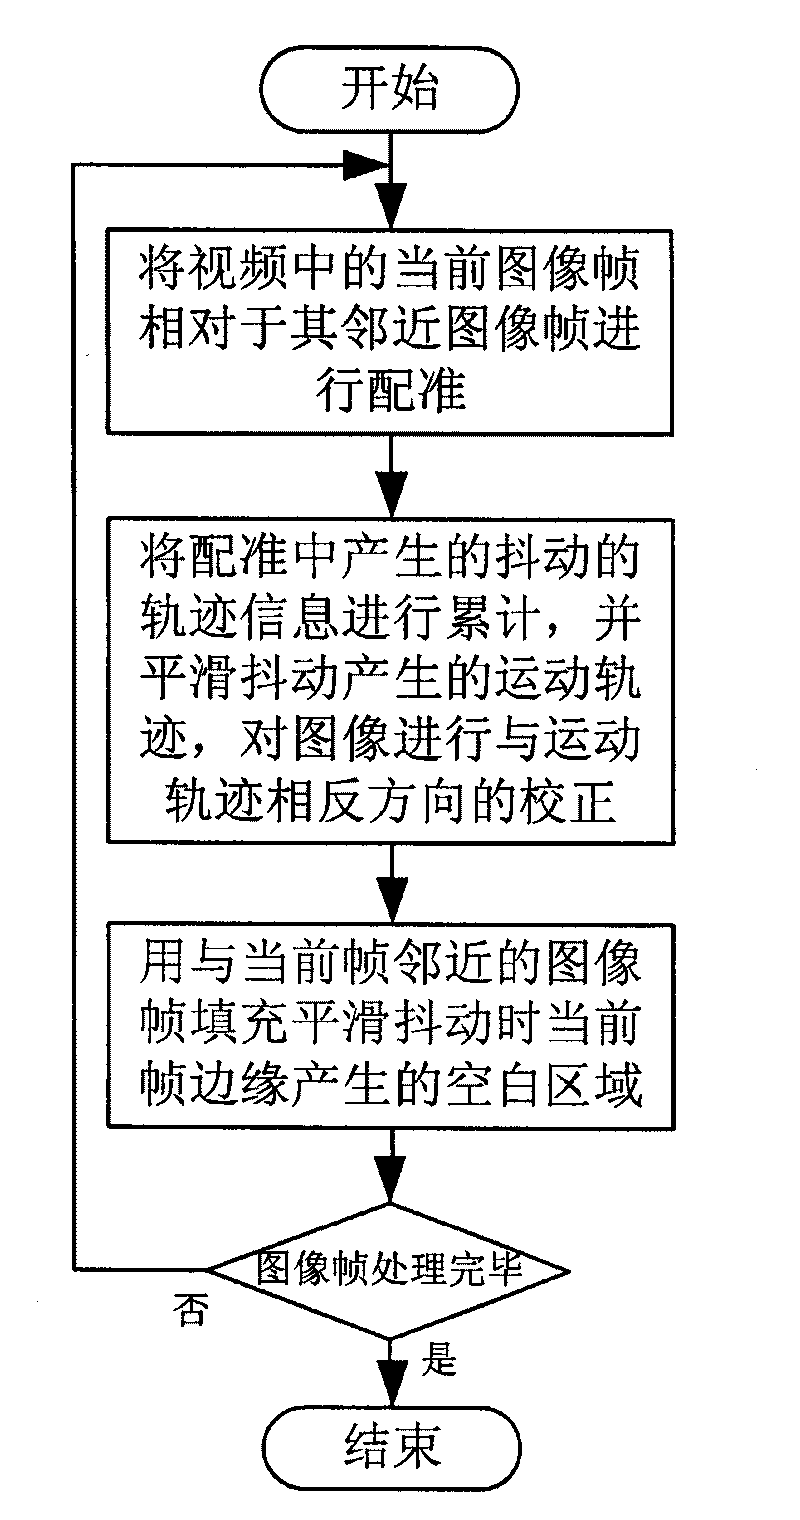 Method and system for removing video jitter